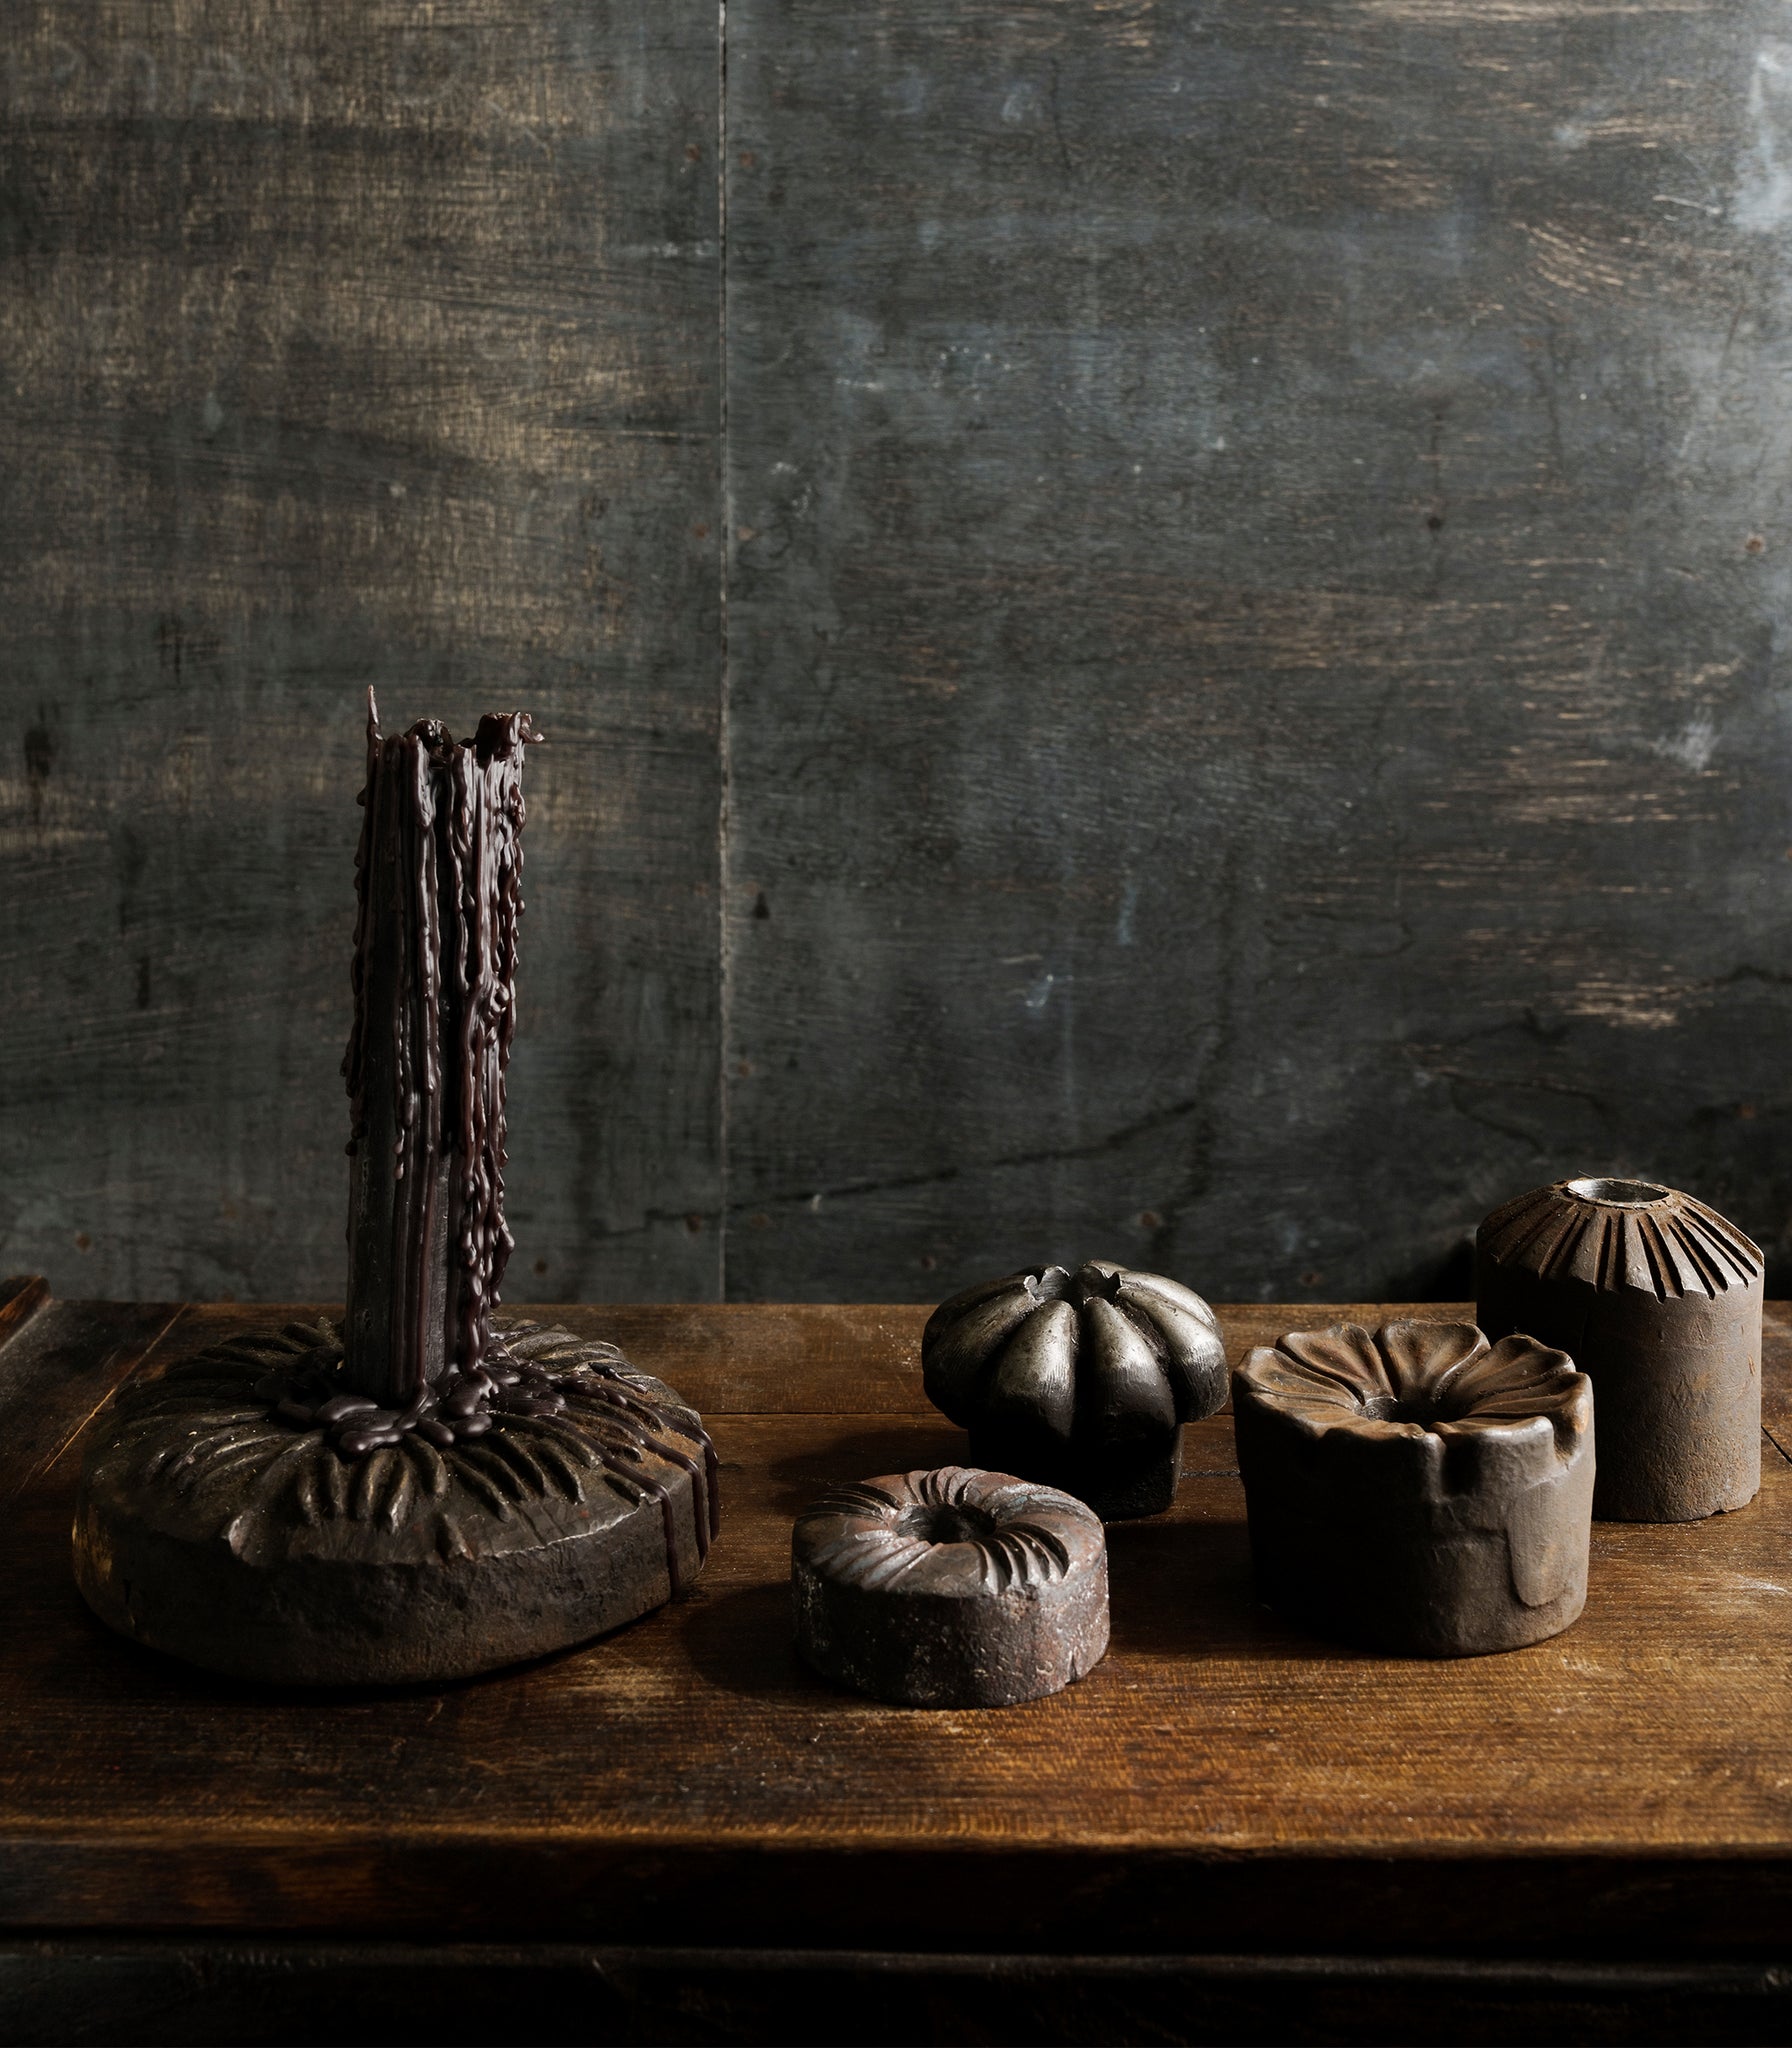 Vintage Foundry Molds as Candle Holders